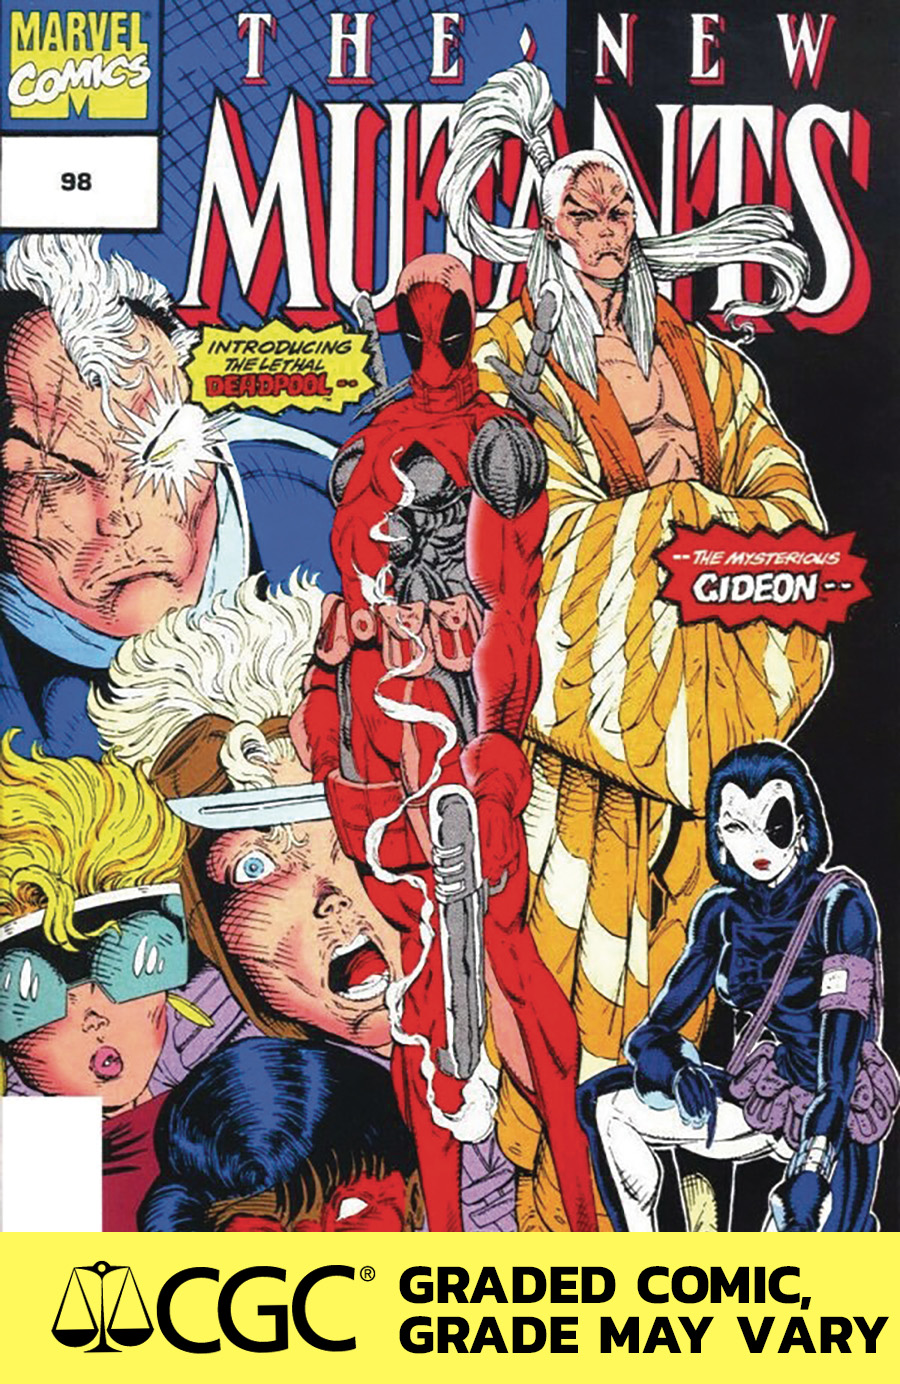 New Mutants #98 Facsimile Edition Cover C DF CGC Graded 9.6 Or Higher